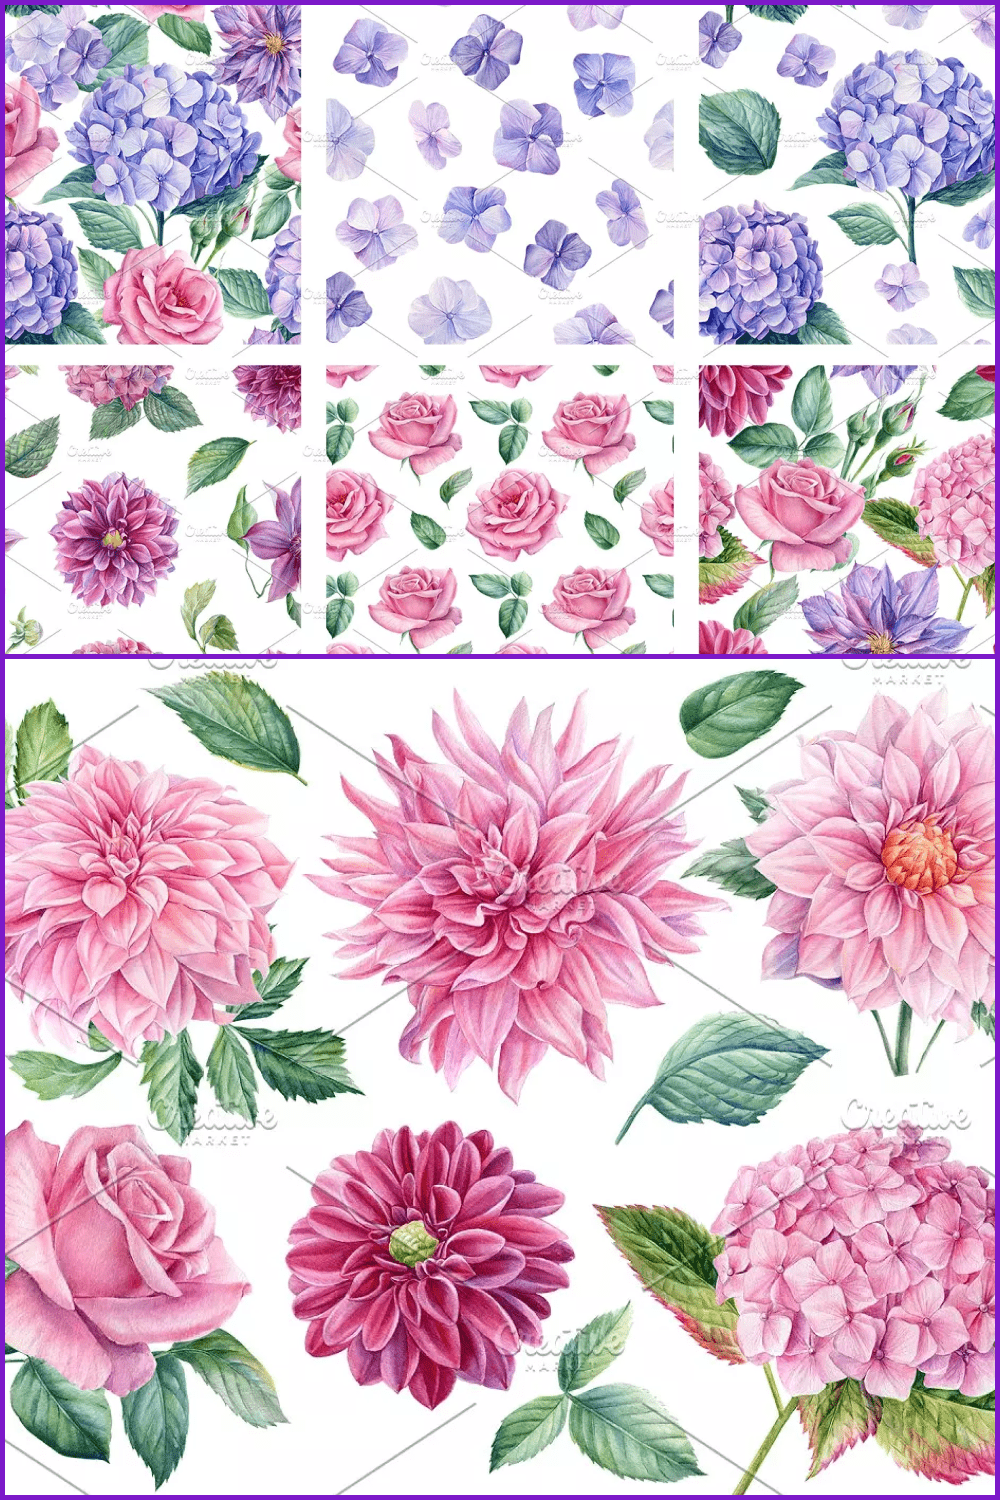 Patterns with bright lush pink and purple flowers.